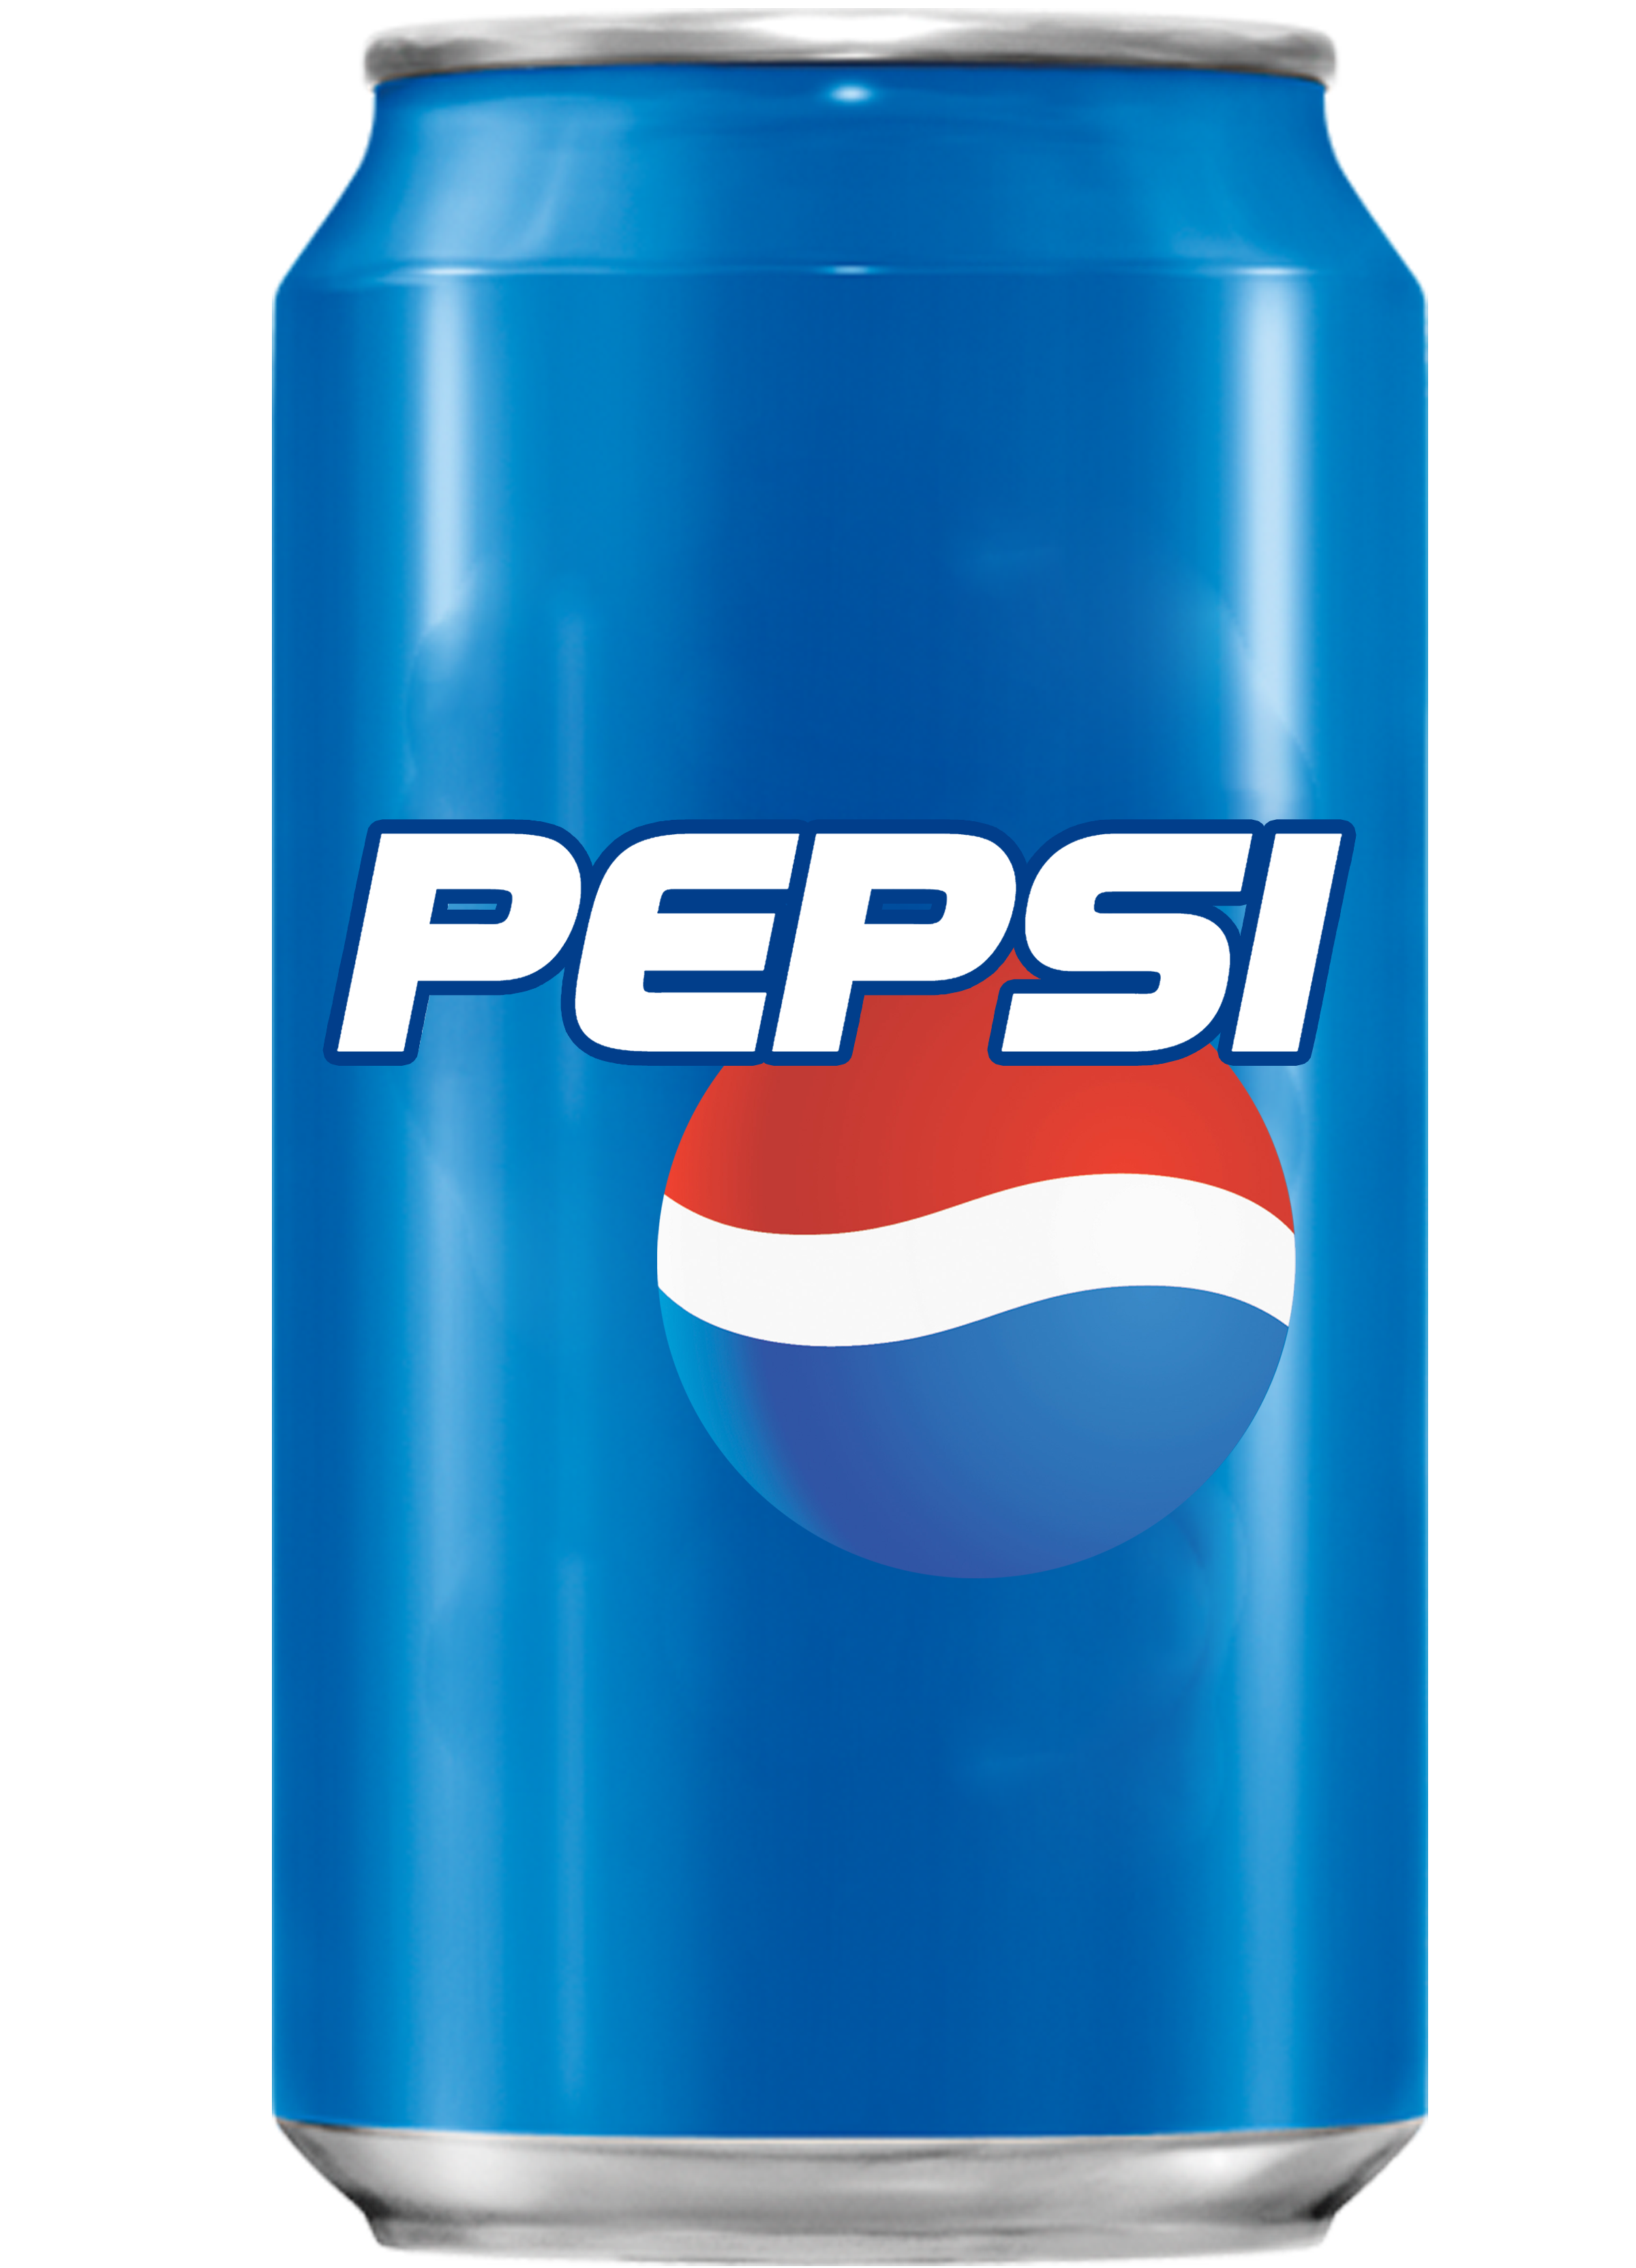 Clip Arts Related To : transparent pepsi png. 